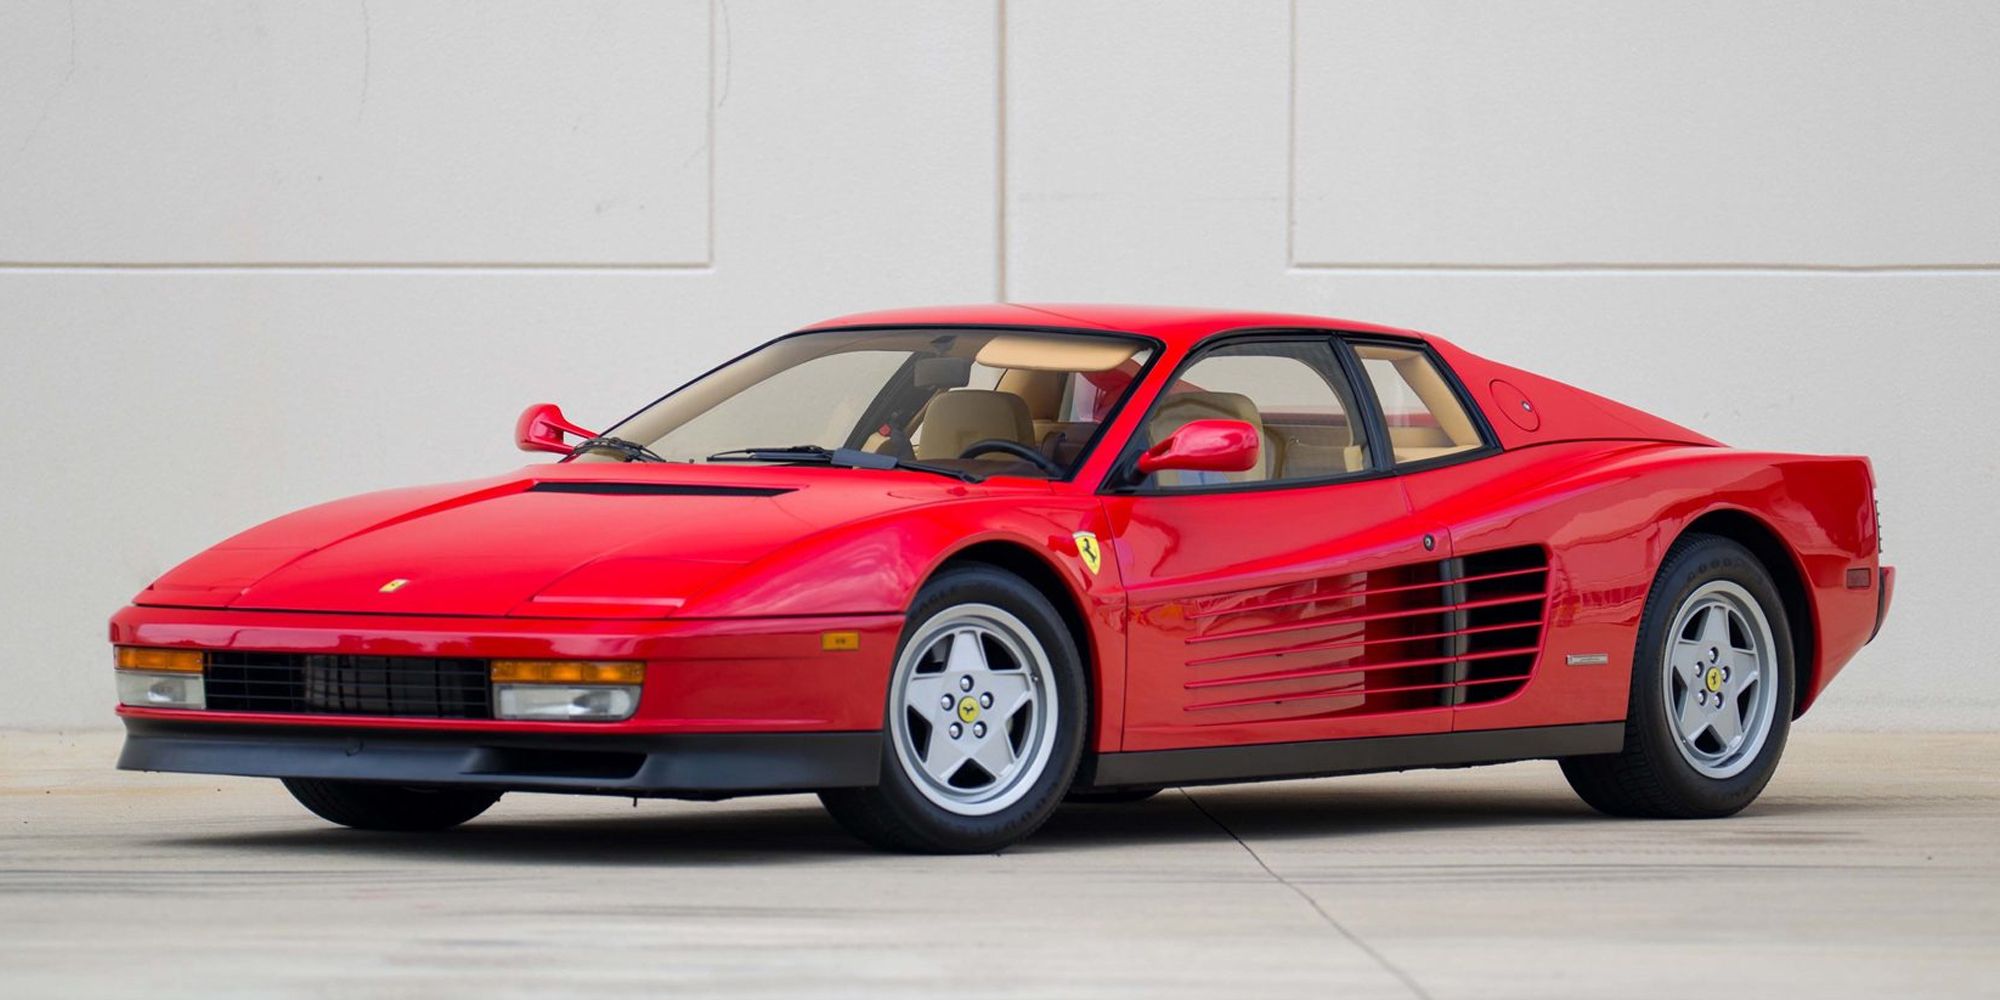 The front of a red Testarossa